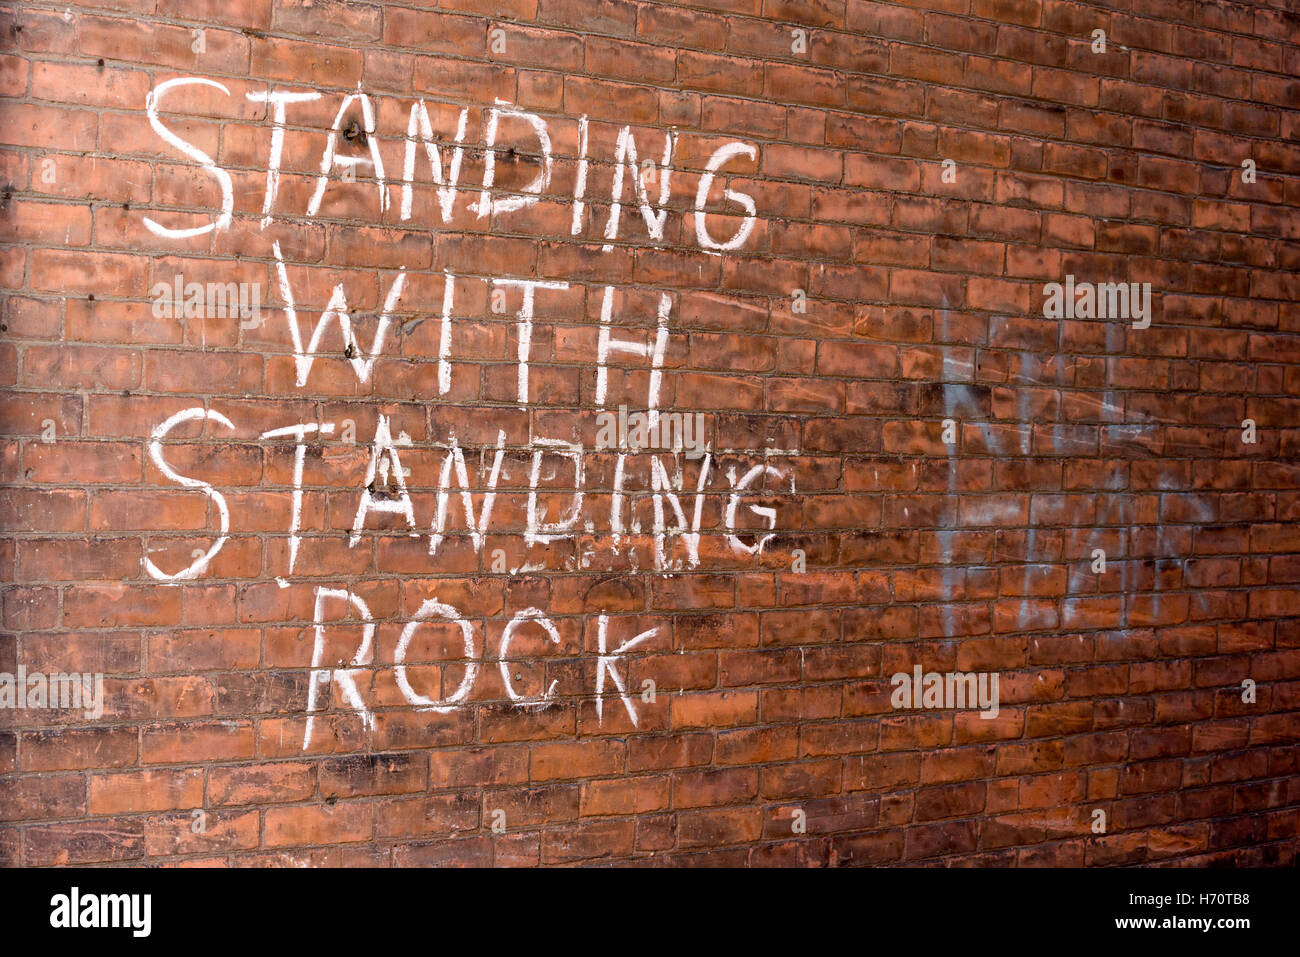 Standing With Standing Rock written on a wall in an alley in Brattleboro, VT. Stock Photo